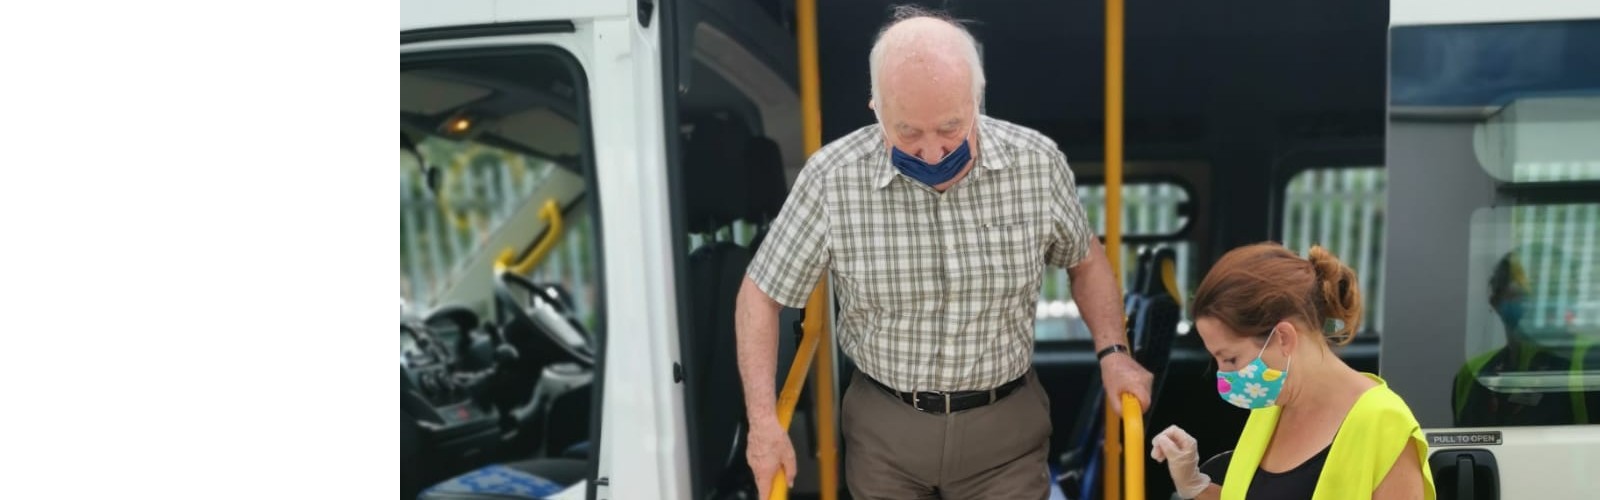 An older man steps out of an Age UK Medway vehicle